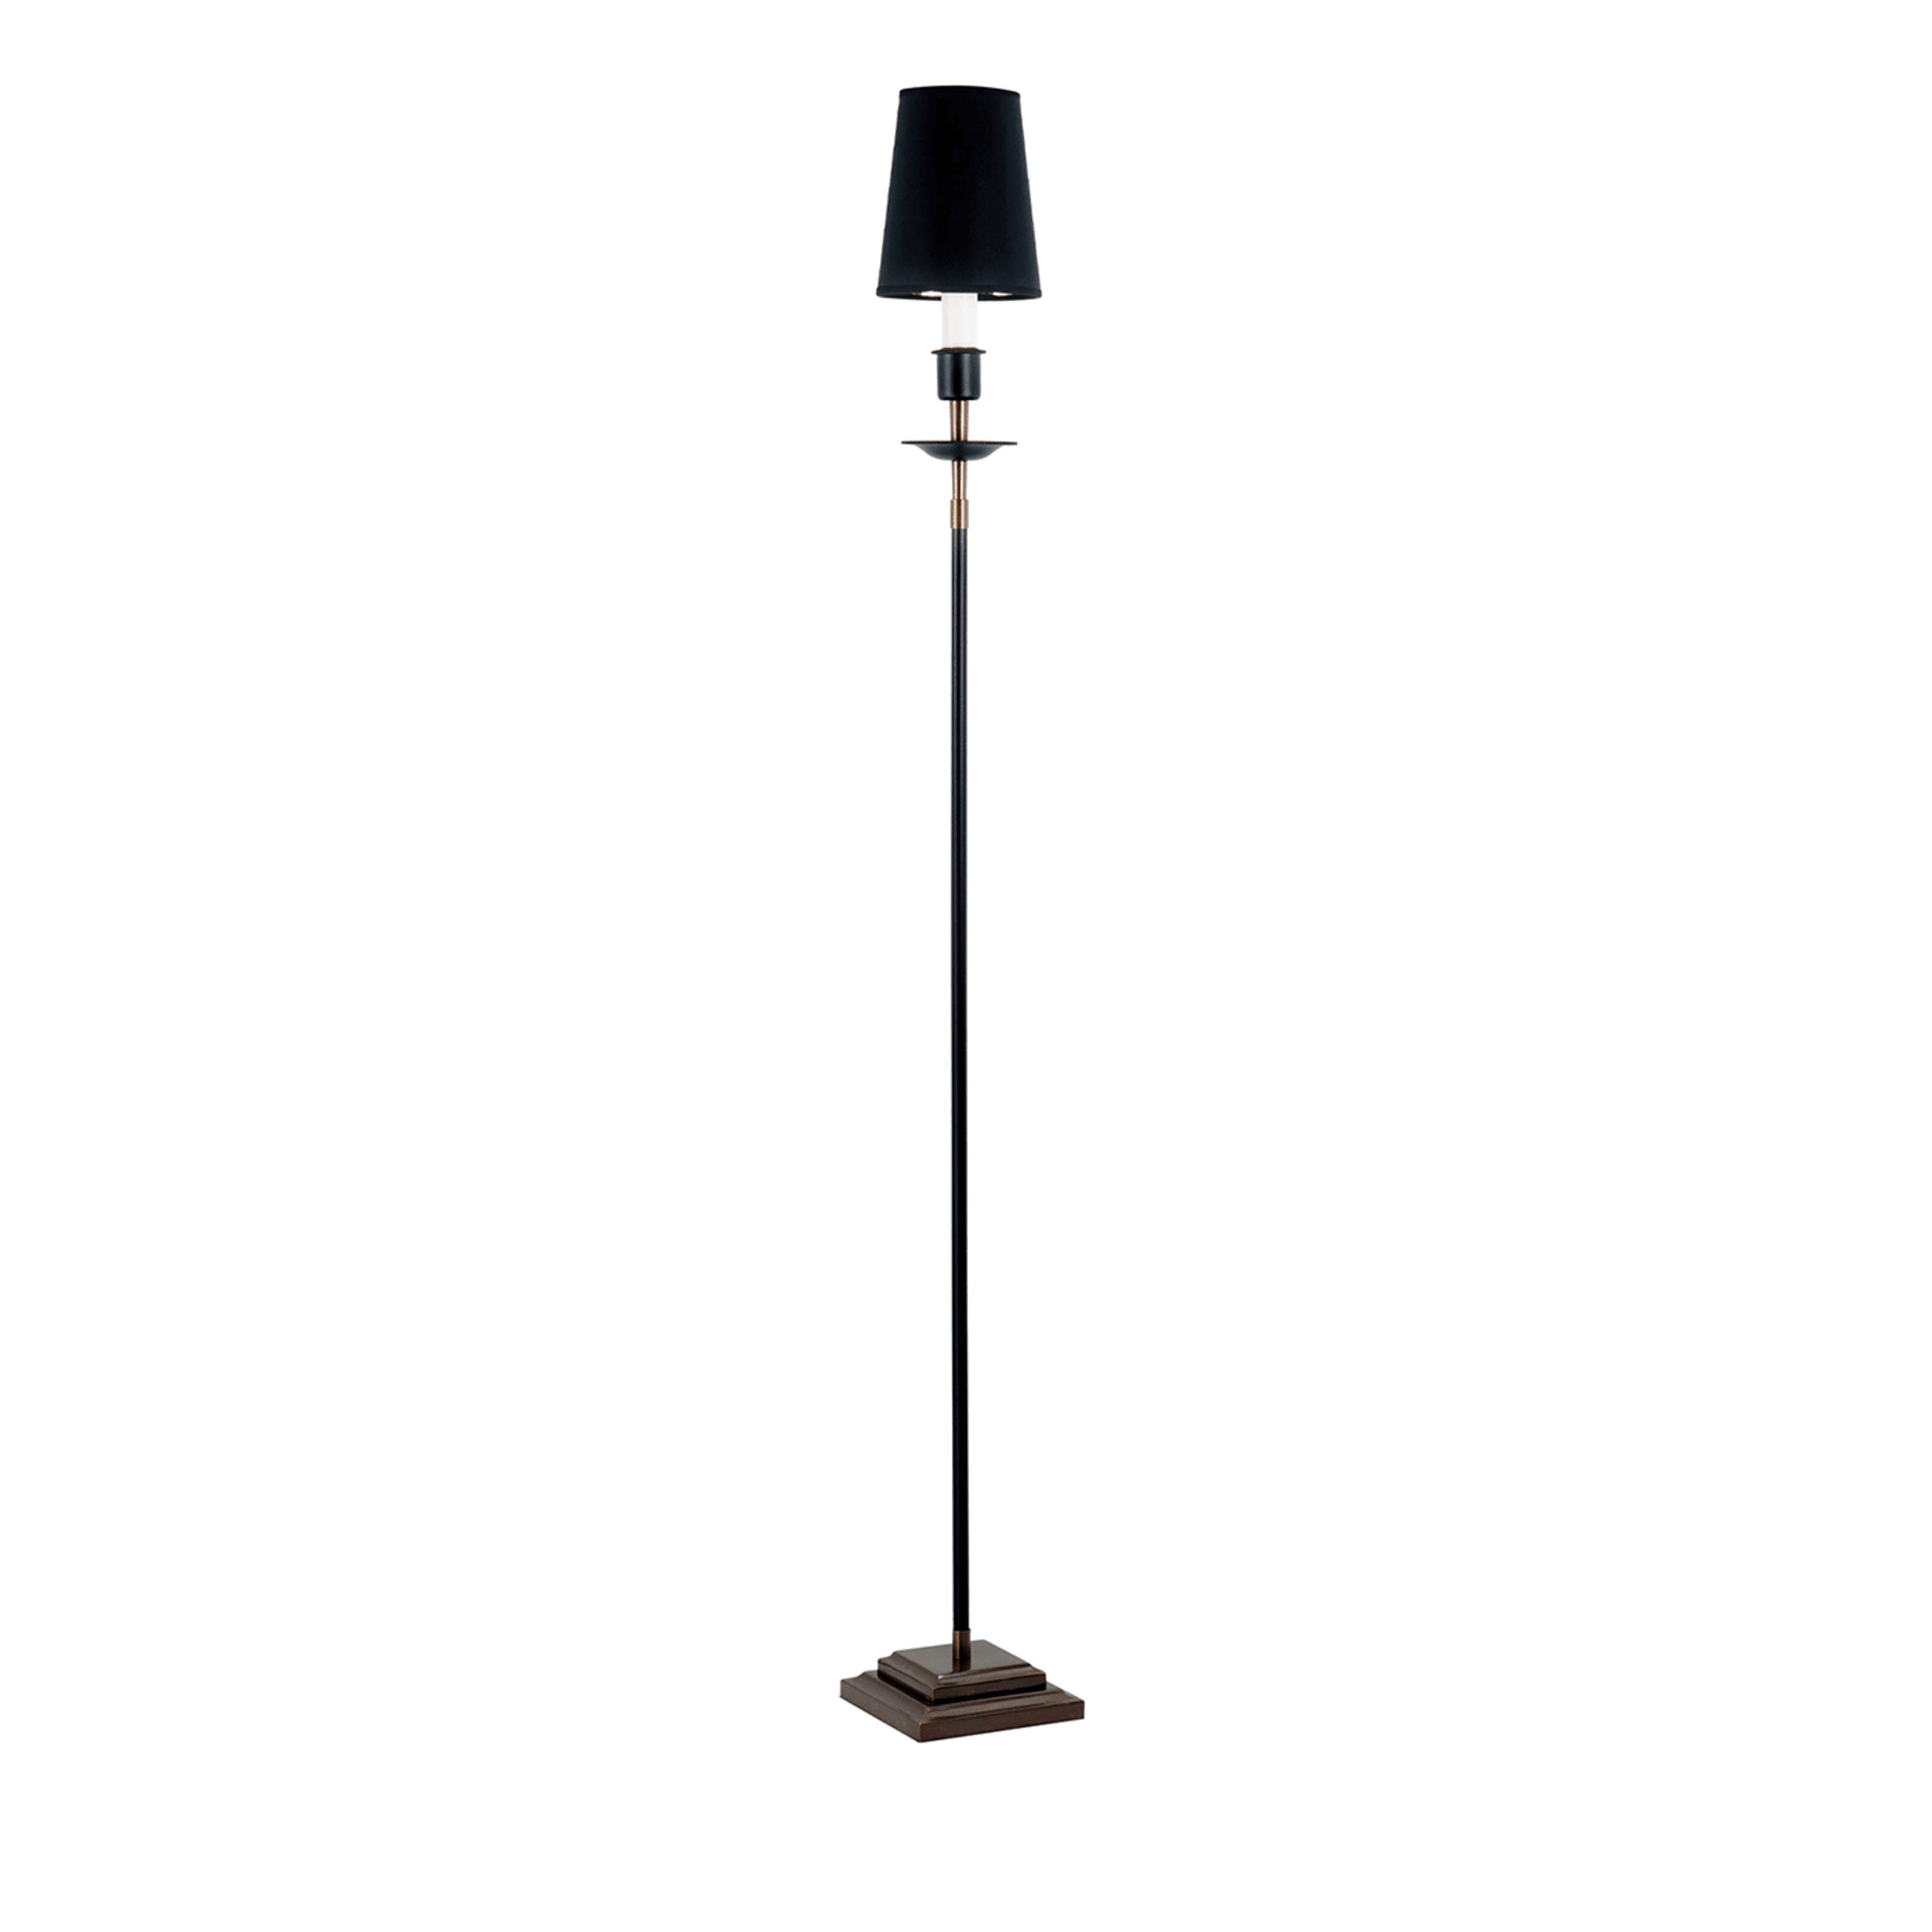 Nelly M274 Floor Lamp by Michele Bönan - Main view